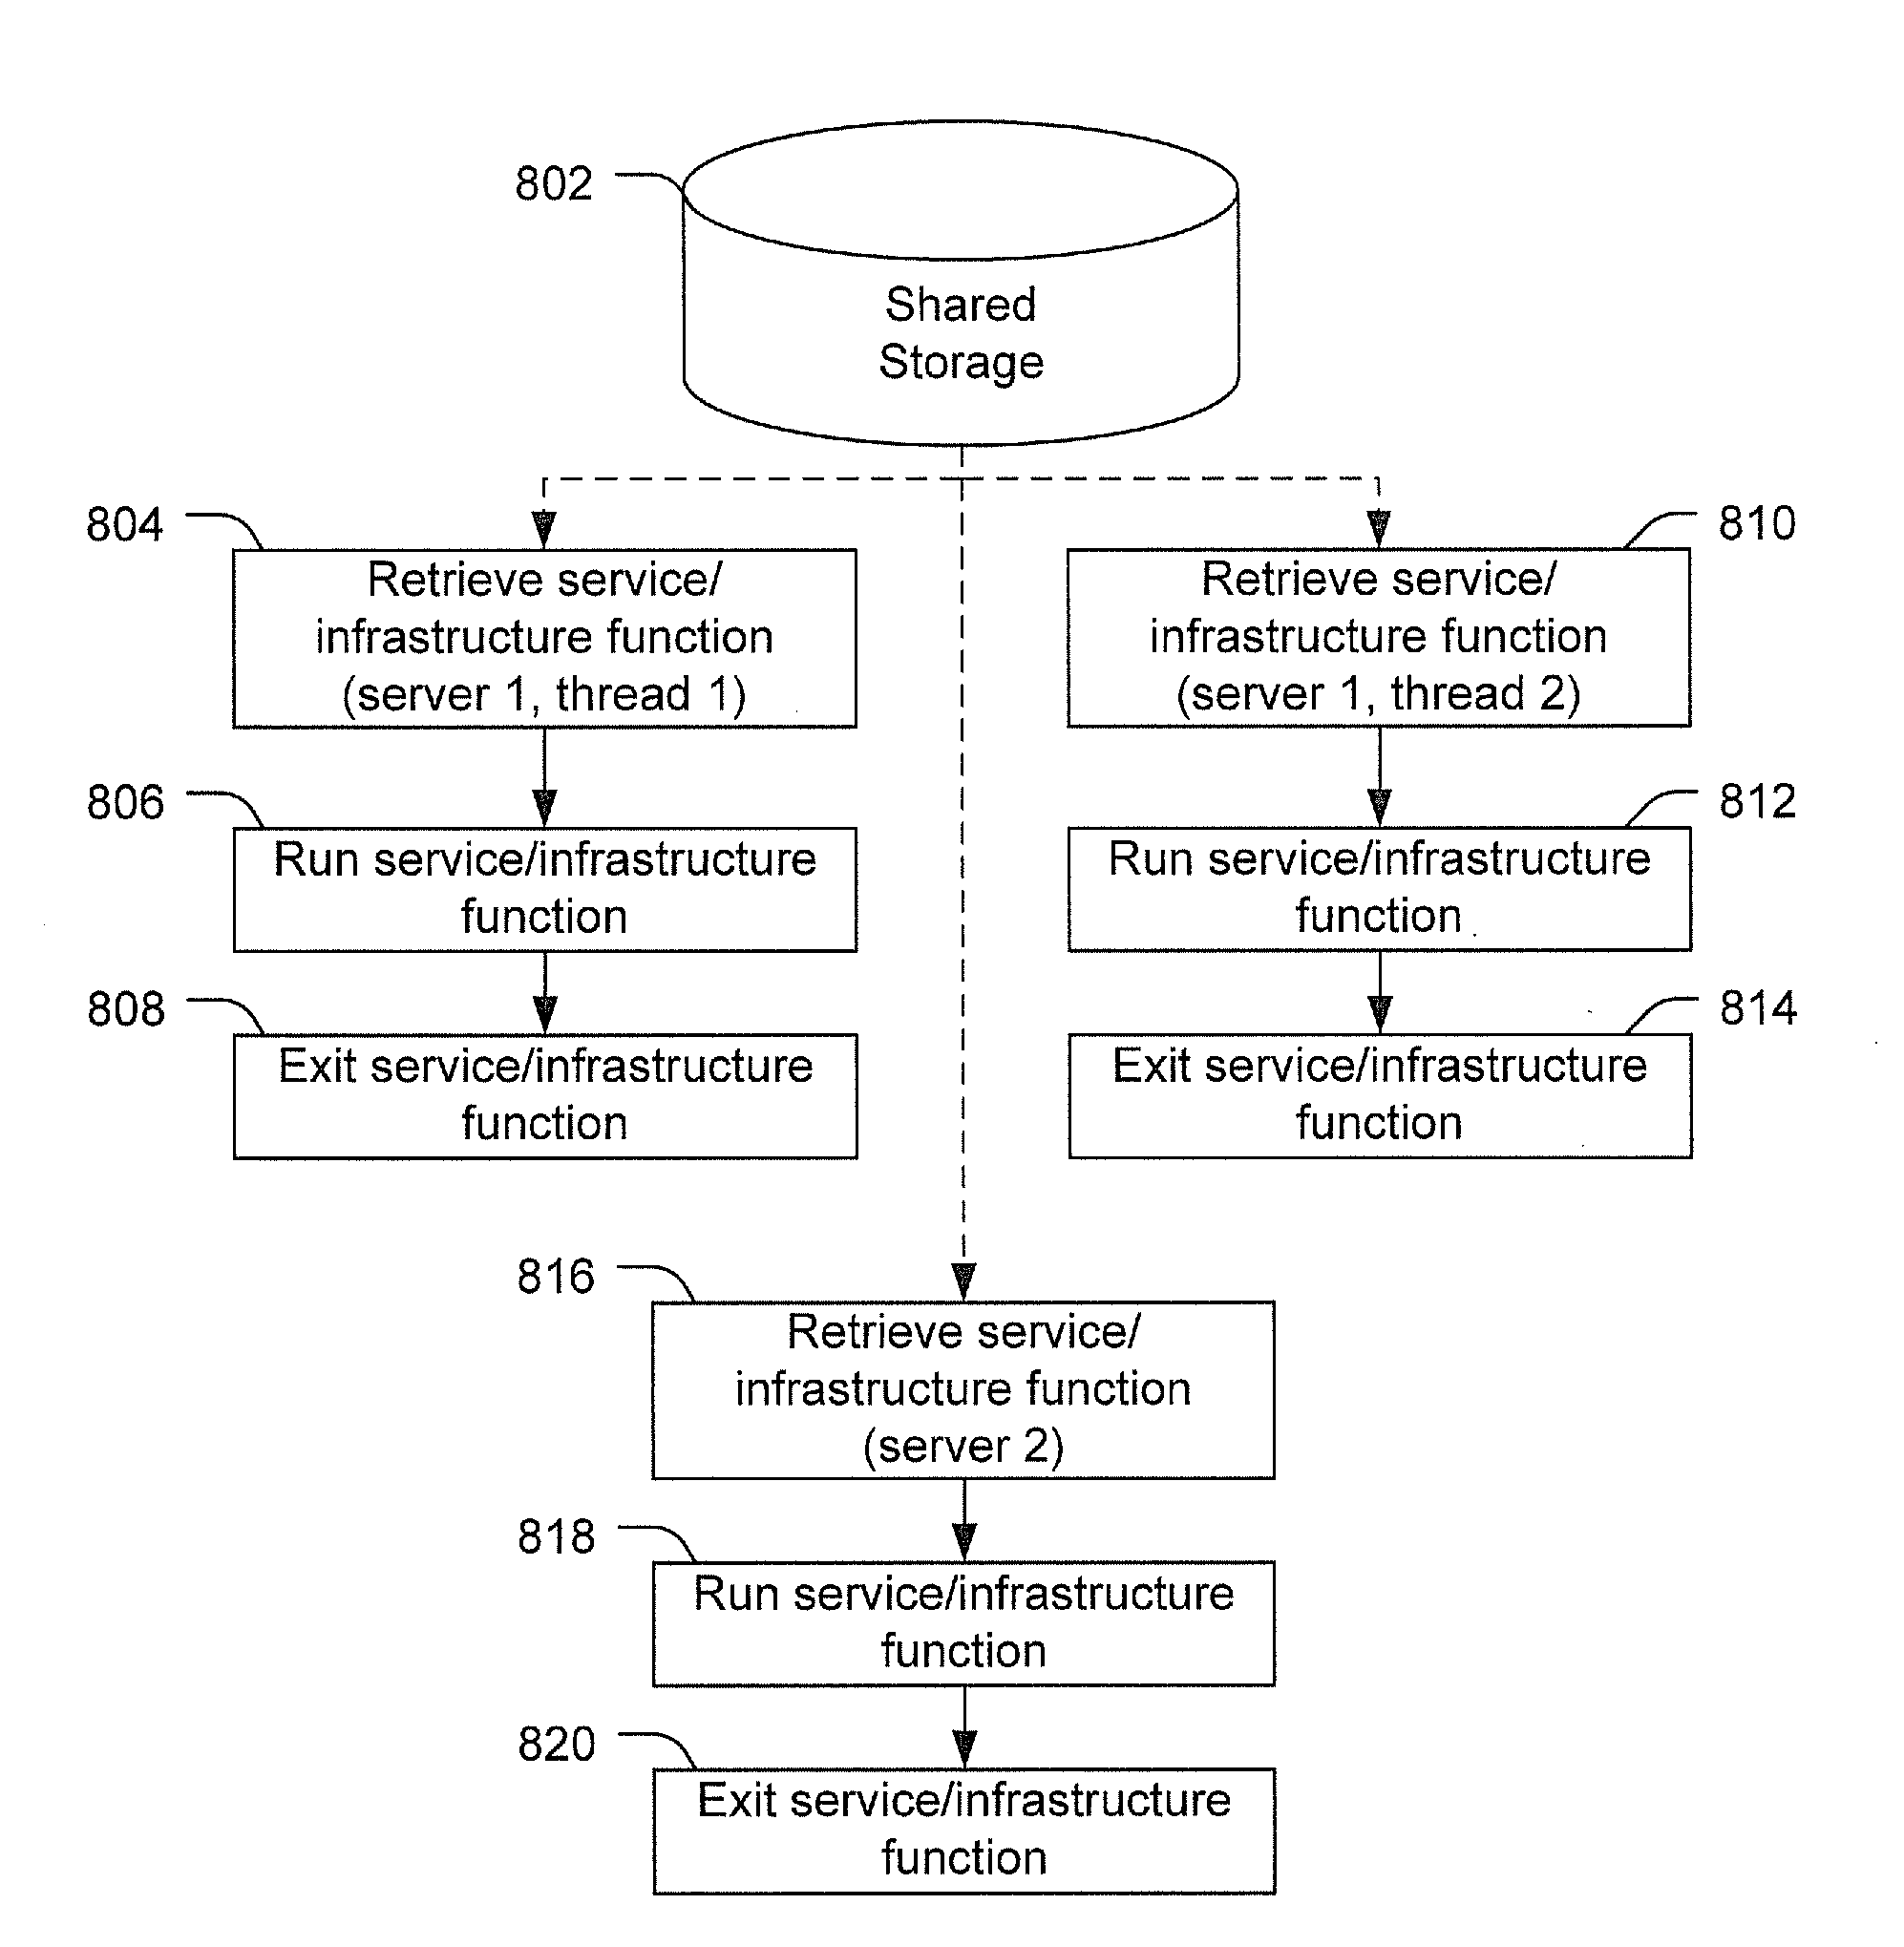 Computer architectures using shared storage